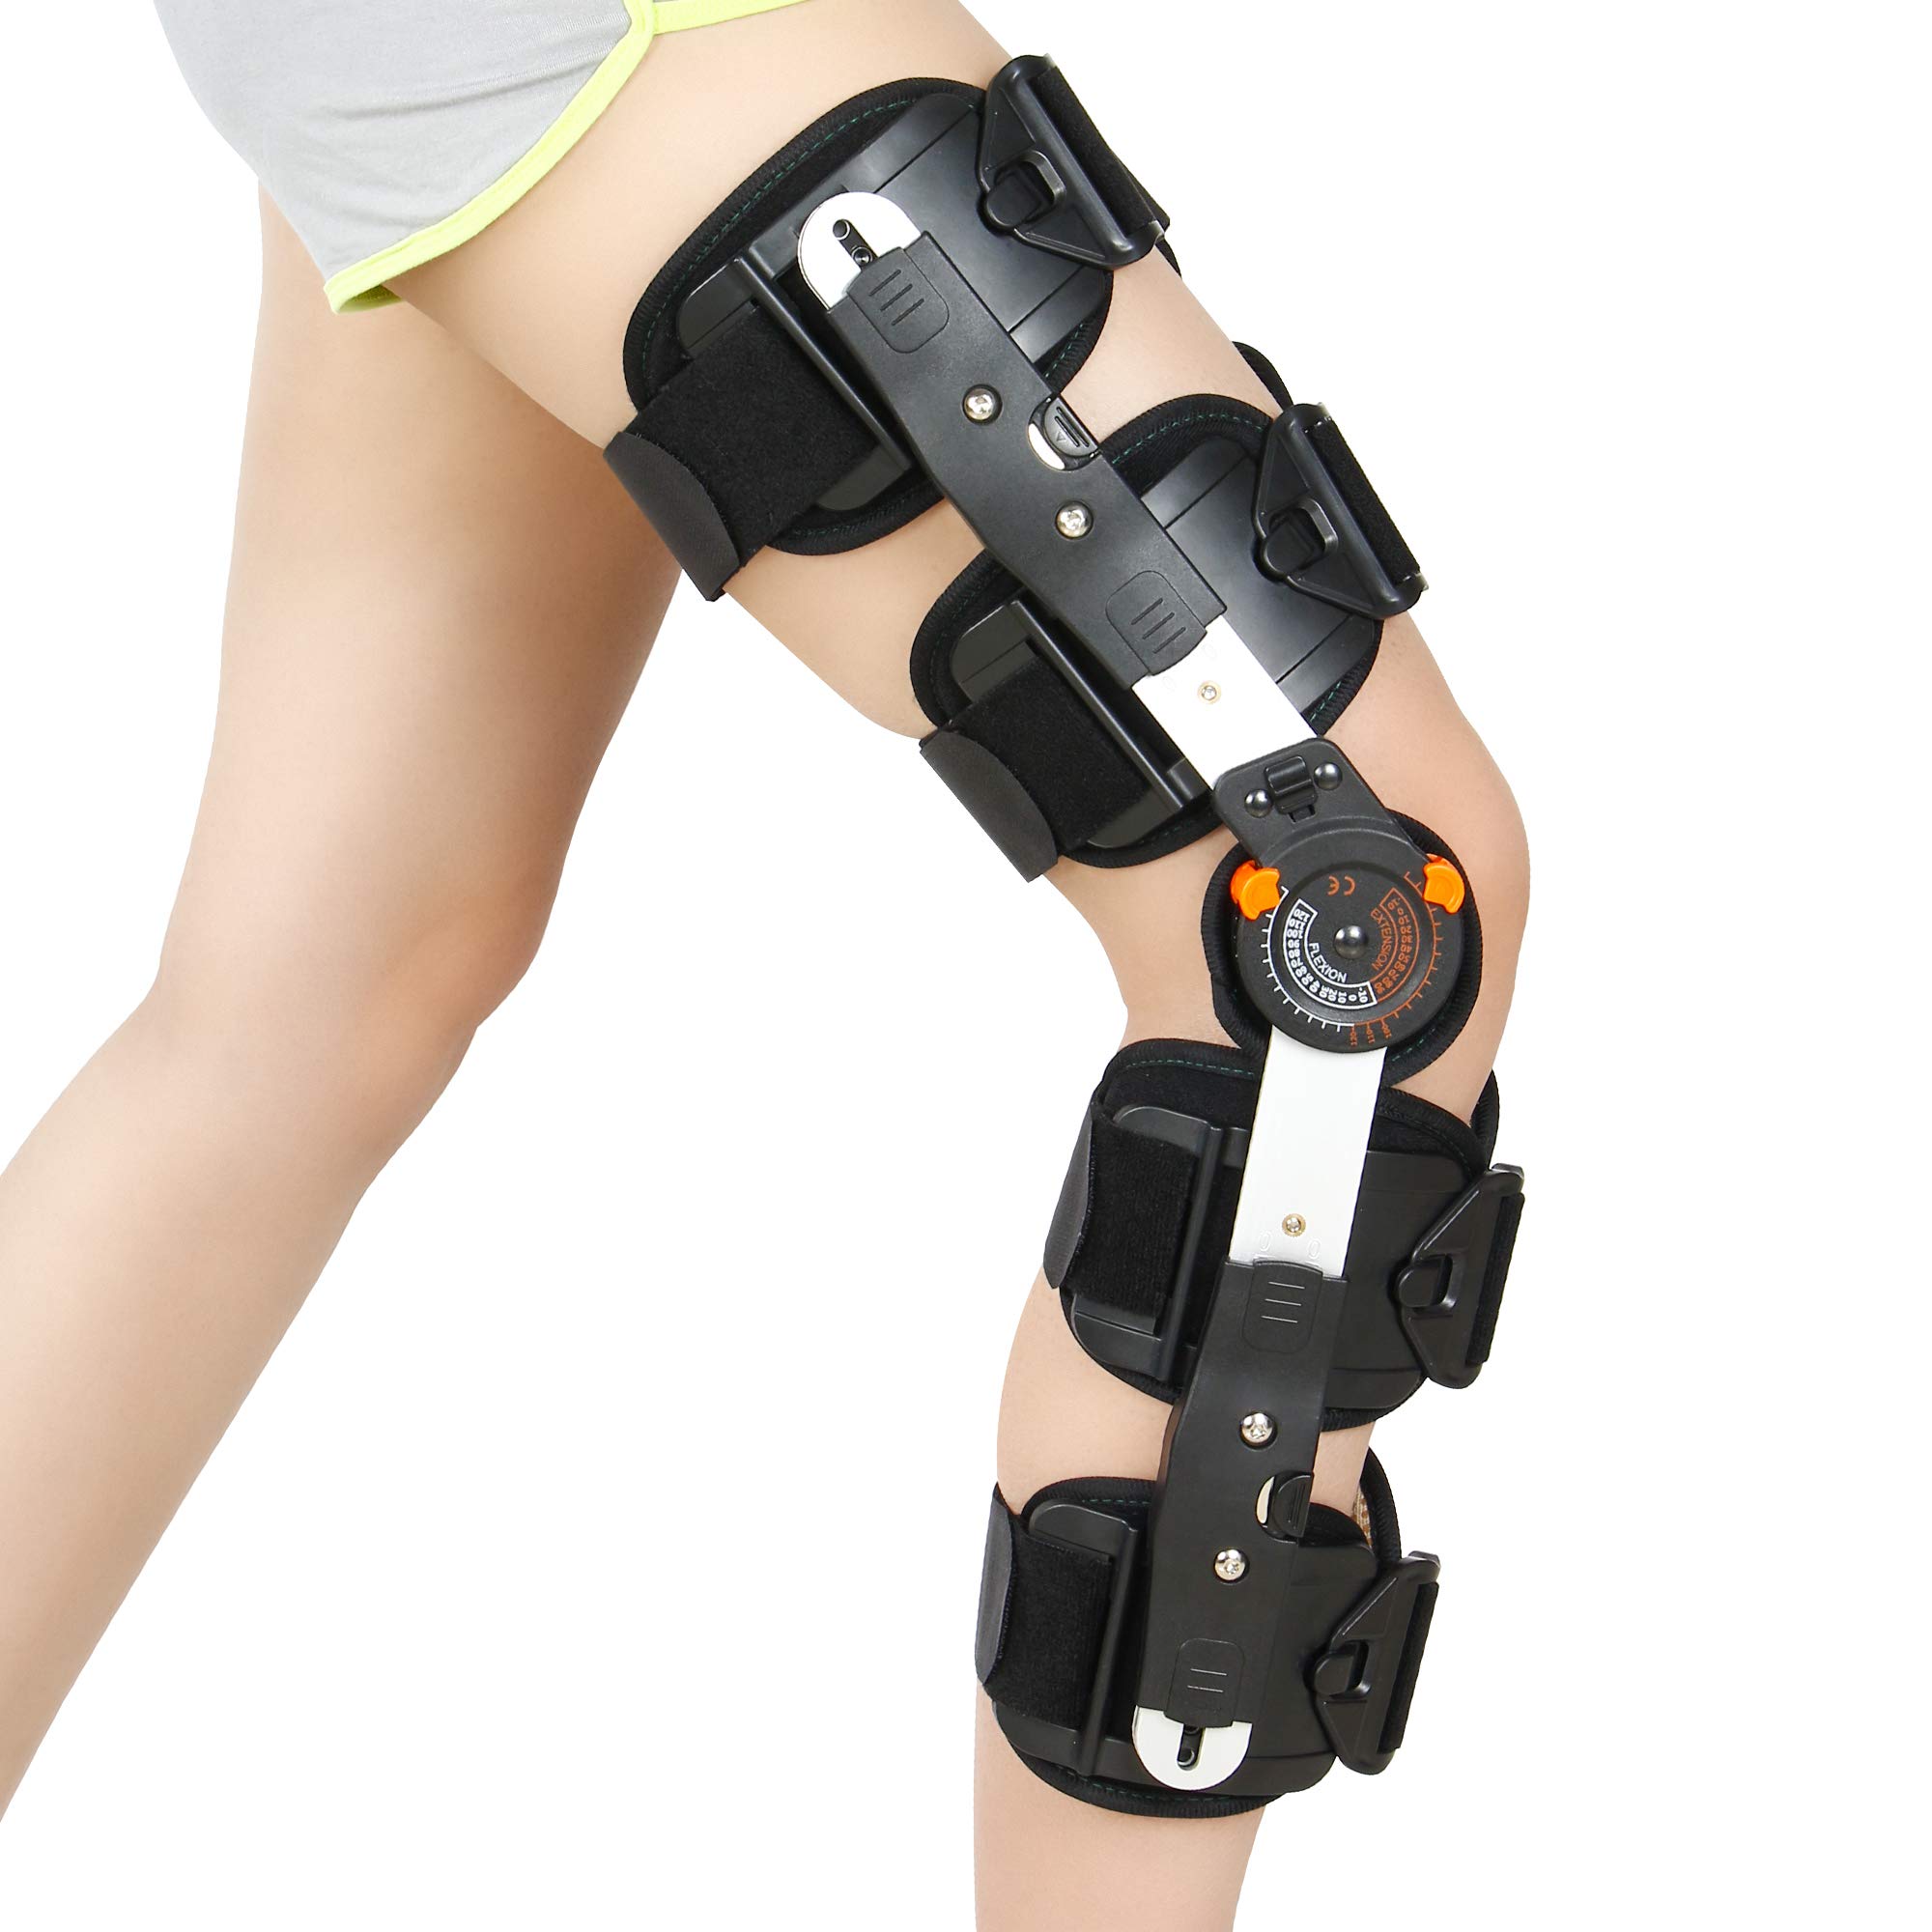 REAQER Hinged Knee ROM Brace Patella Brace Orthosis Knee Orthoses  Adjustable Knee Support Leg Support Suitable for Knee Injury Recovery  Postoperative Rehabilitation of Arthritis or Fracture